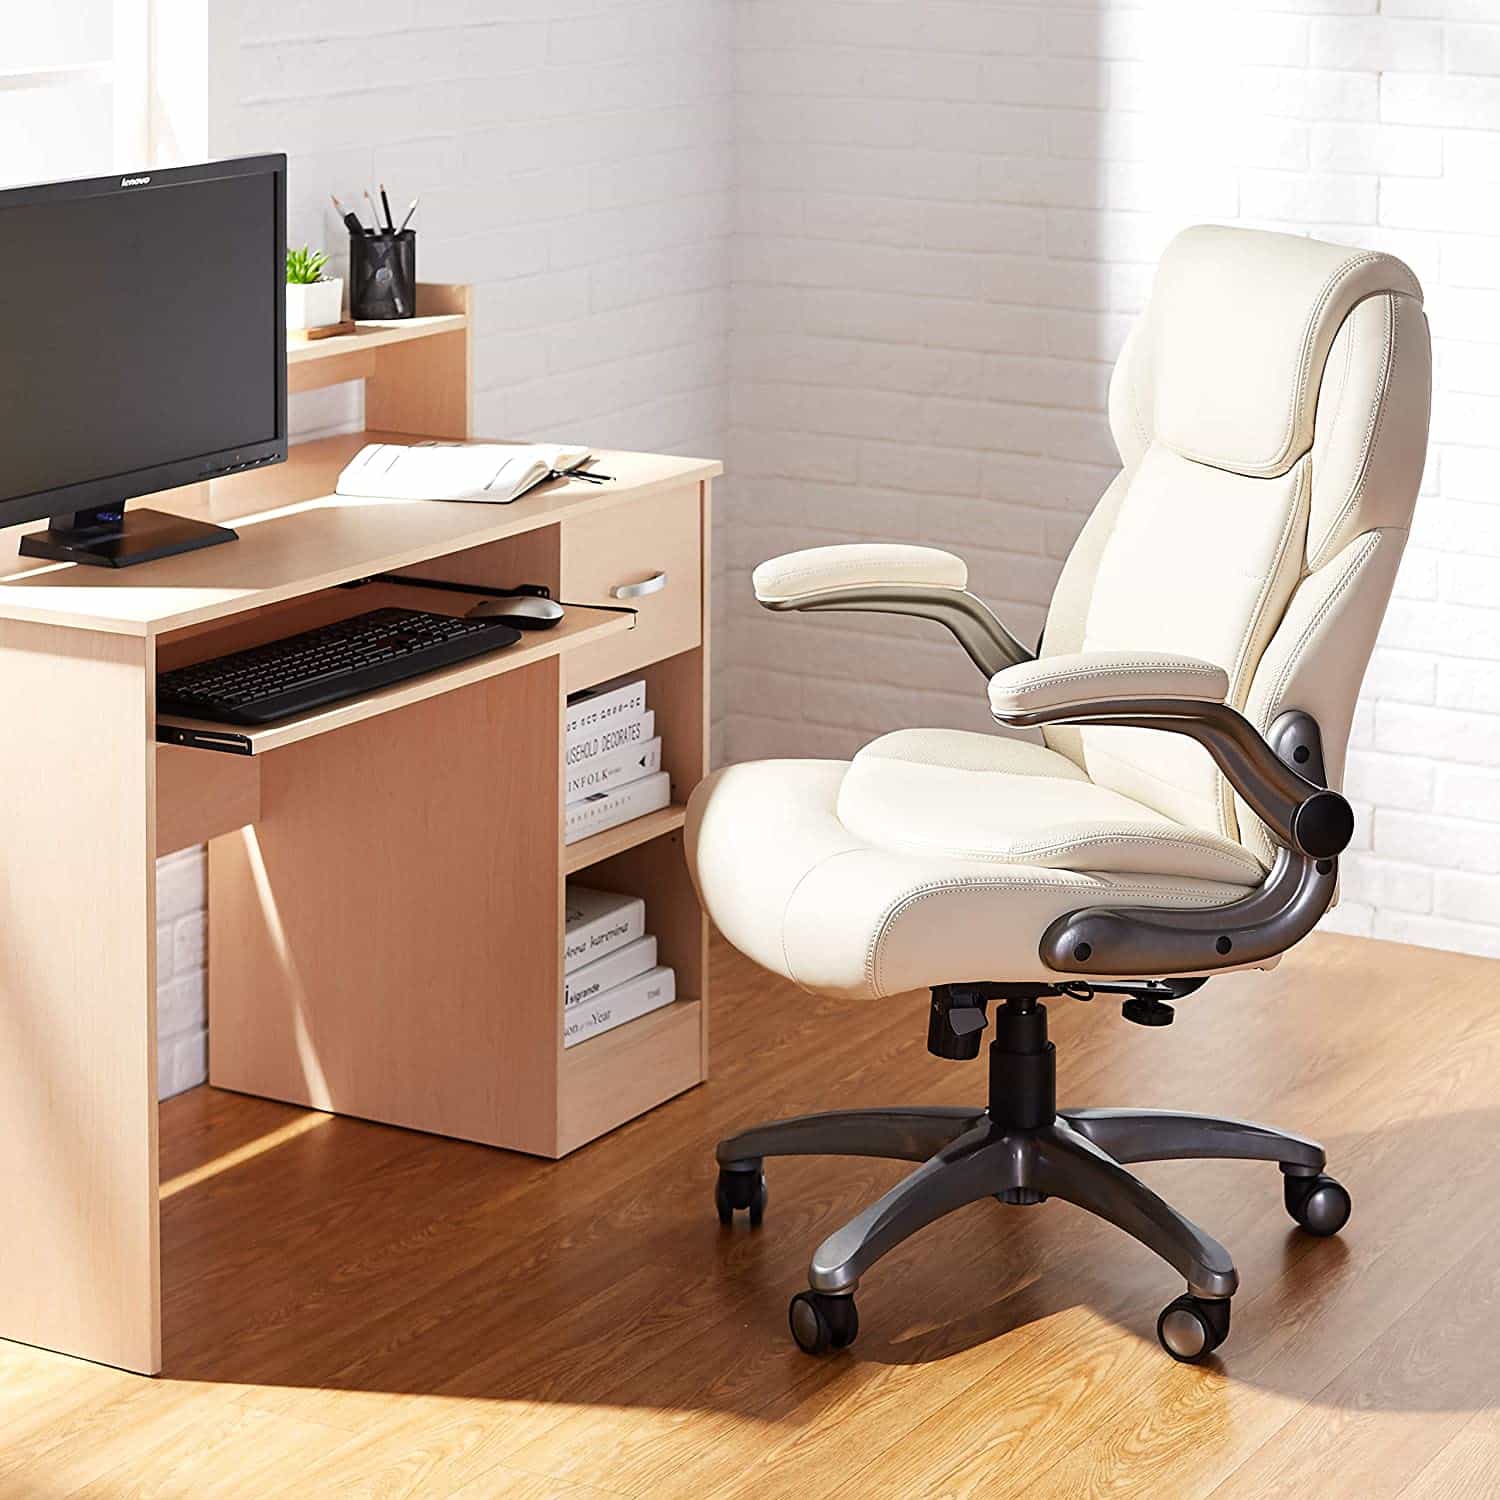 Top 10 Best Comfortable Office Chairs in 2022 Reviews | Buyer's Guide